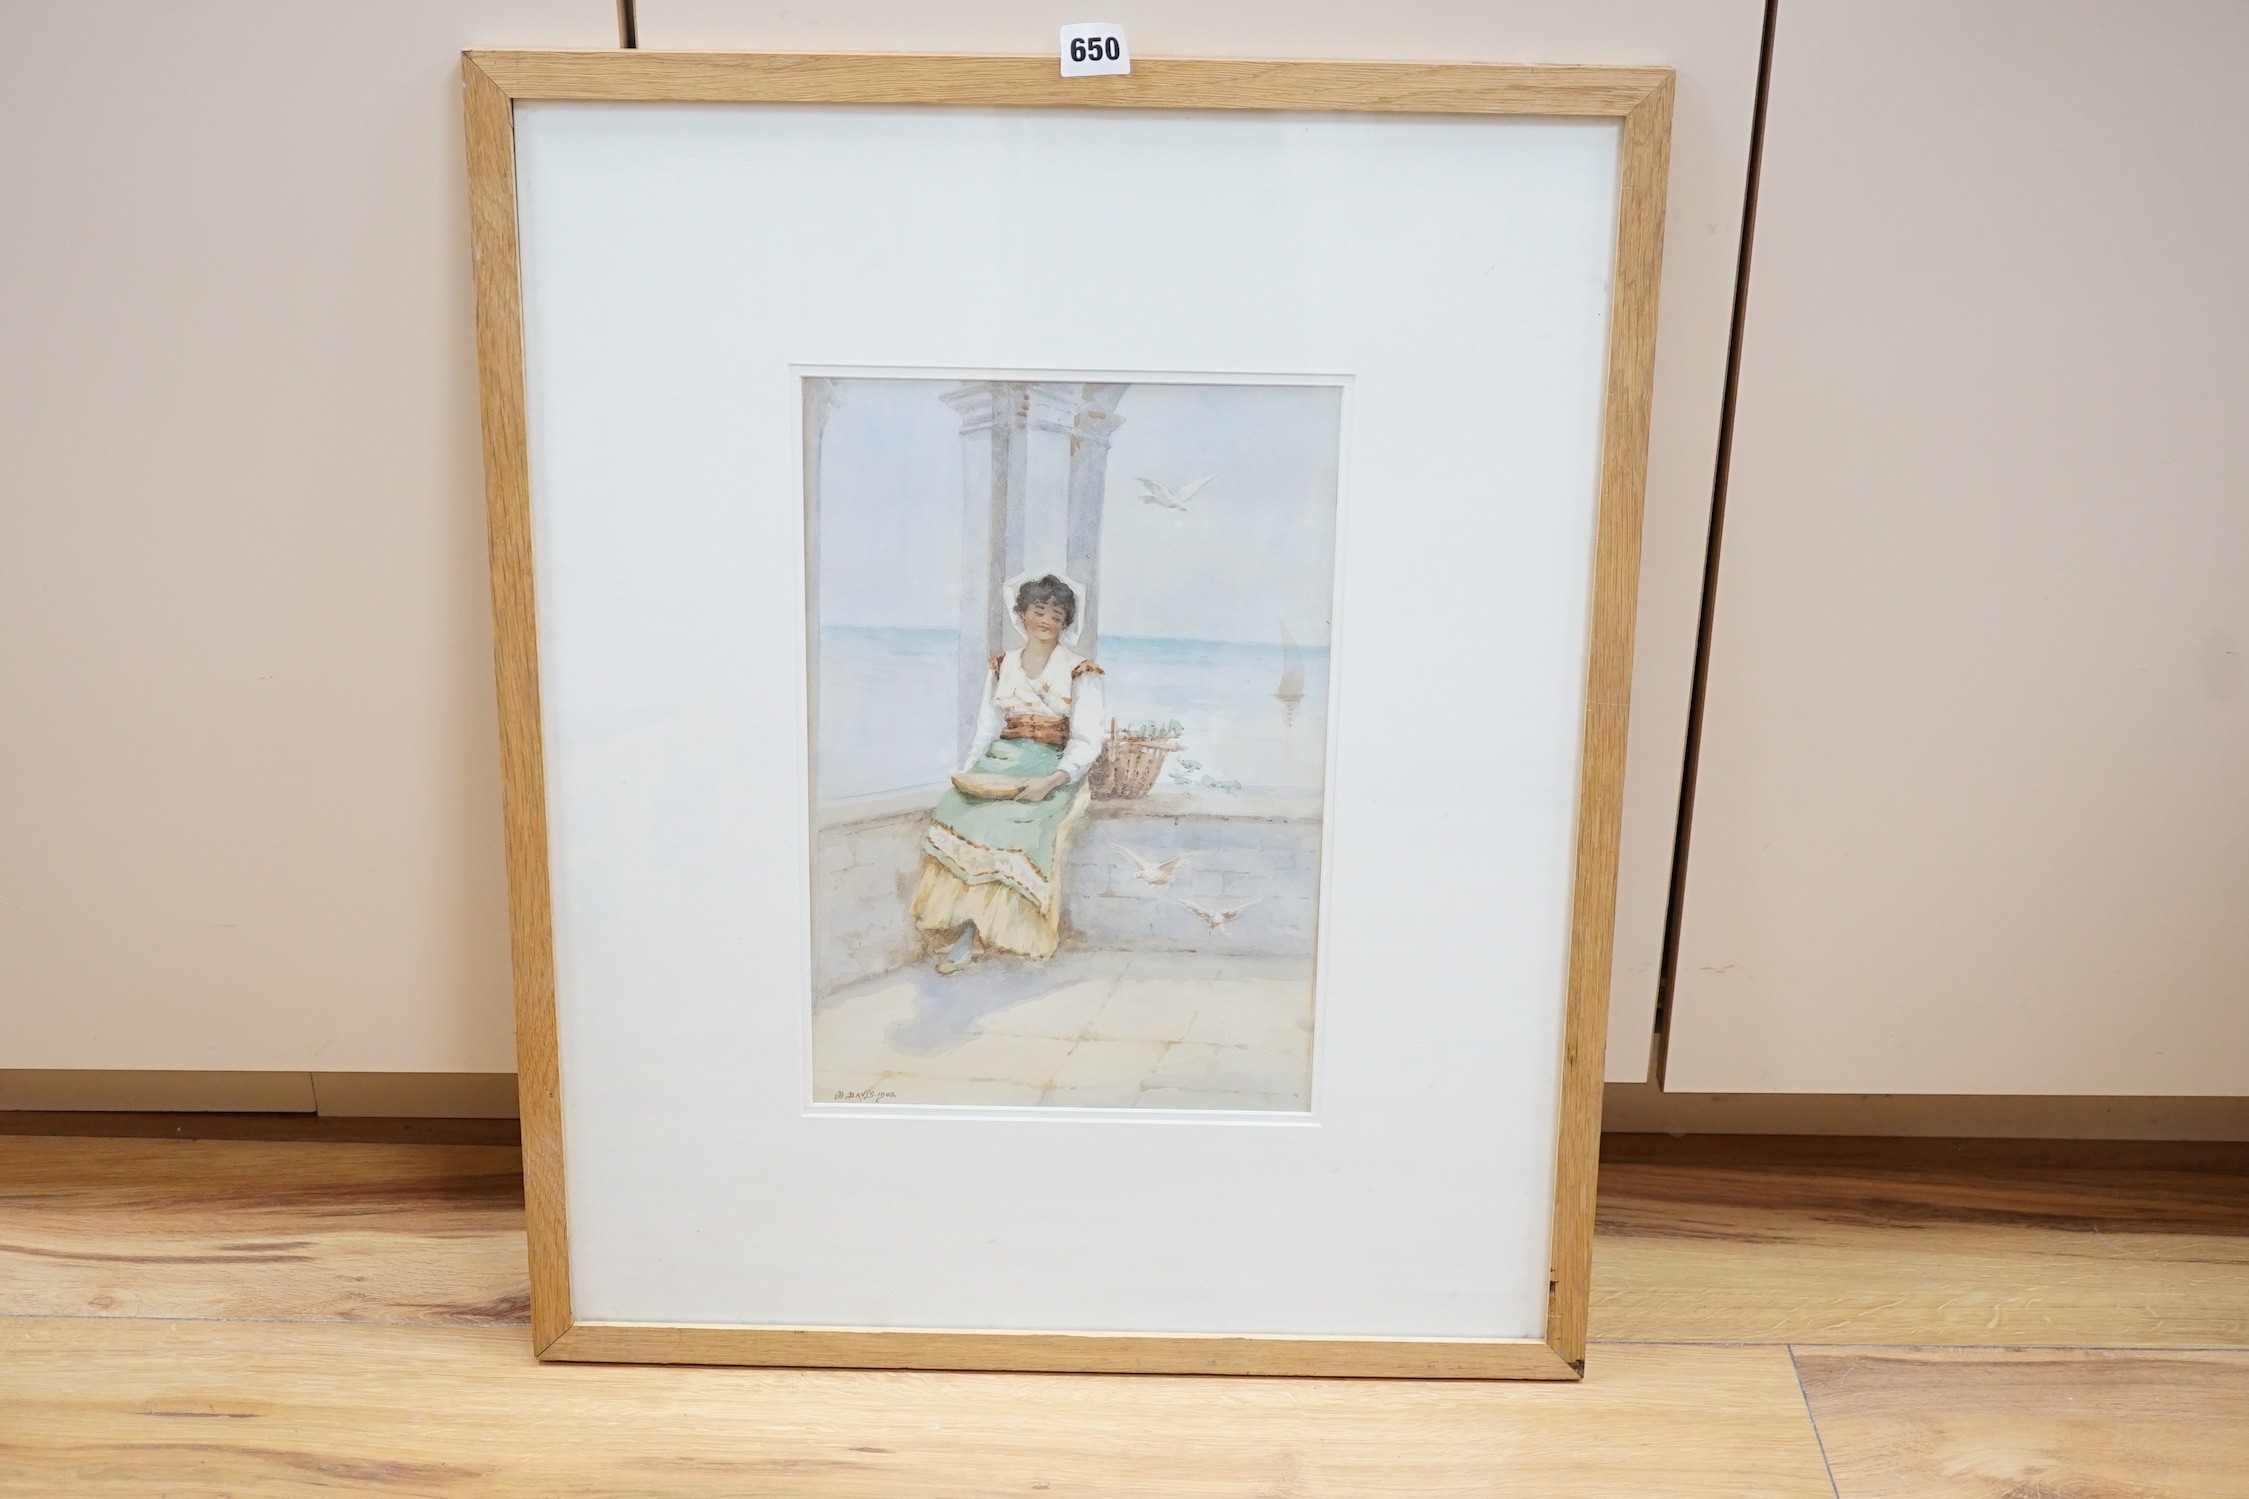 S.B. Davis, watercolour, Neapolitan woman seated upon a terrace, signed and dated 1903, 36 x 24cm